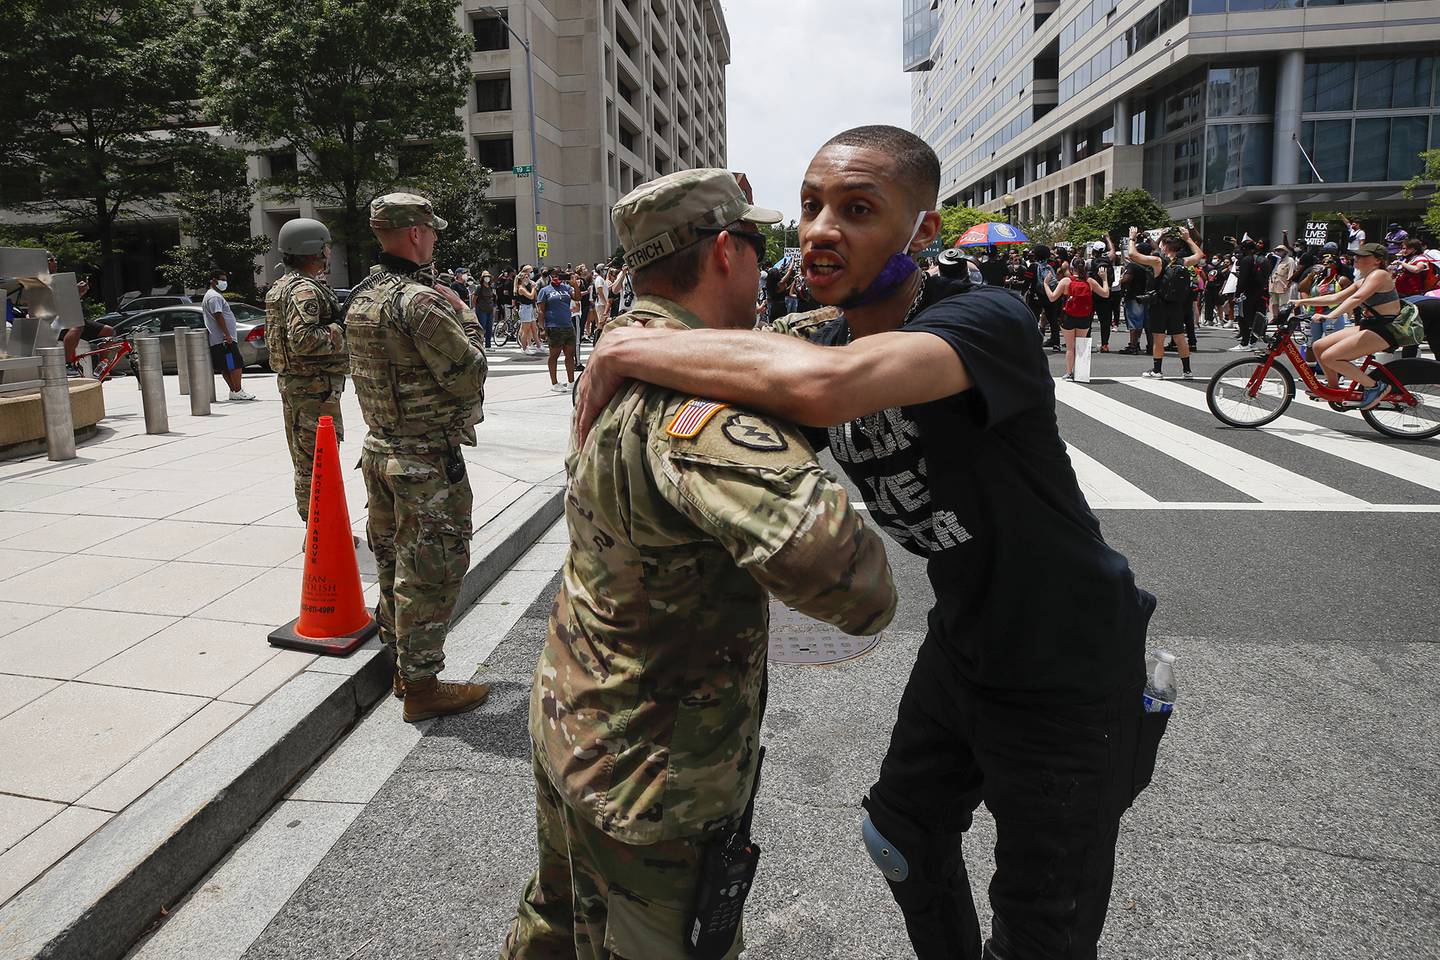 In this June 6, 2020, file photo, a demonstrator hugs a National Guard soldier during a protest  in Washington, over the death of George Floyd, a black man who was in police custody in Minneapolis.